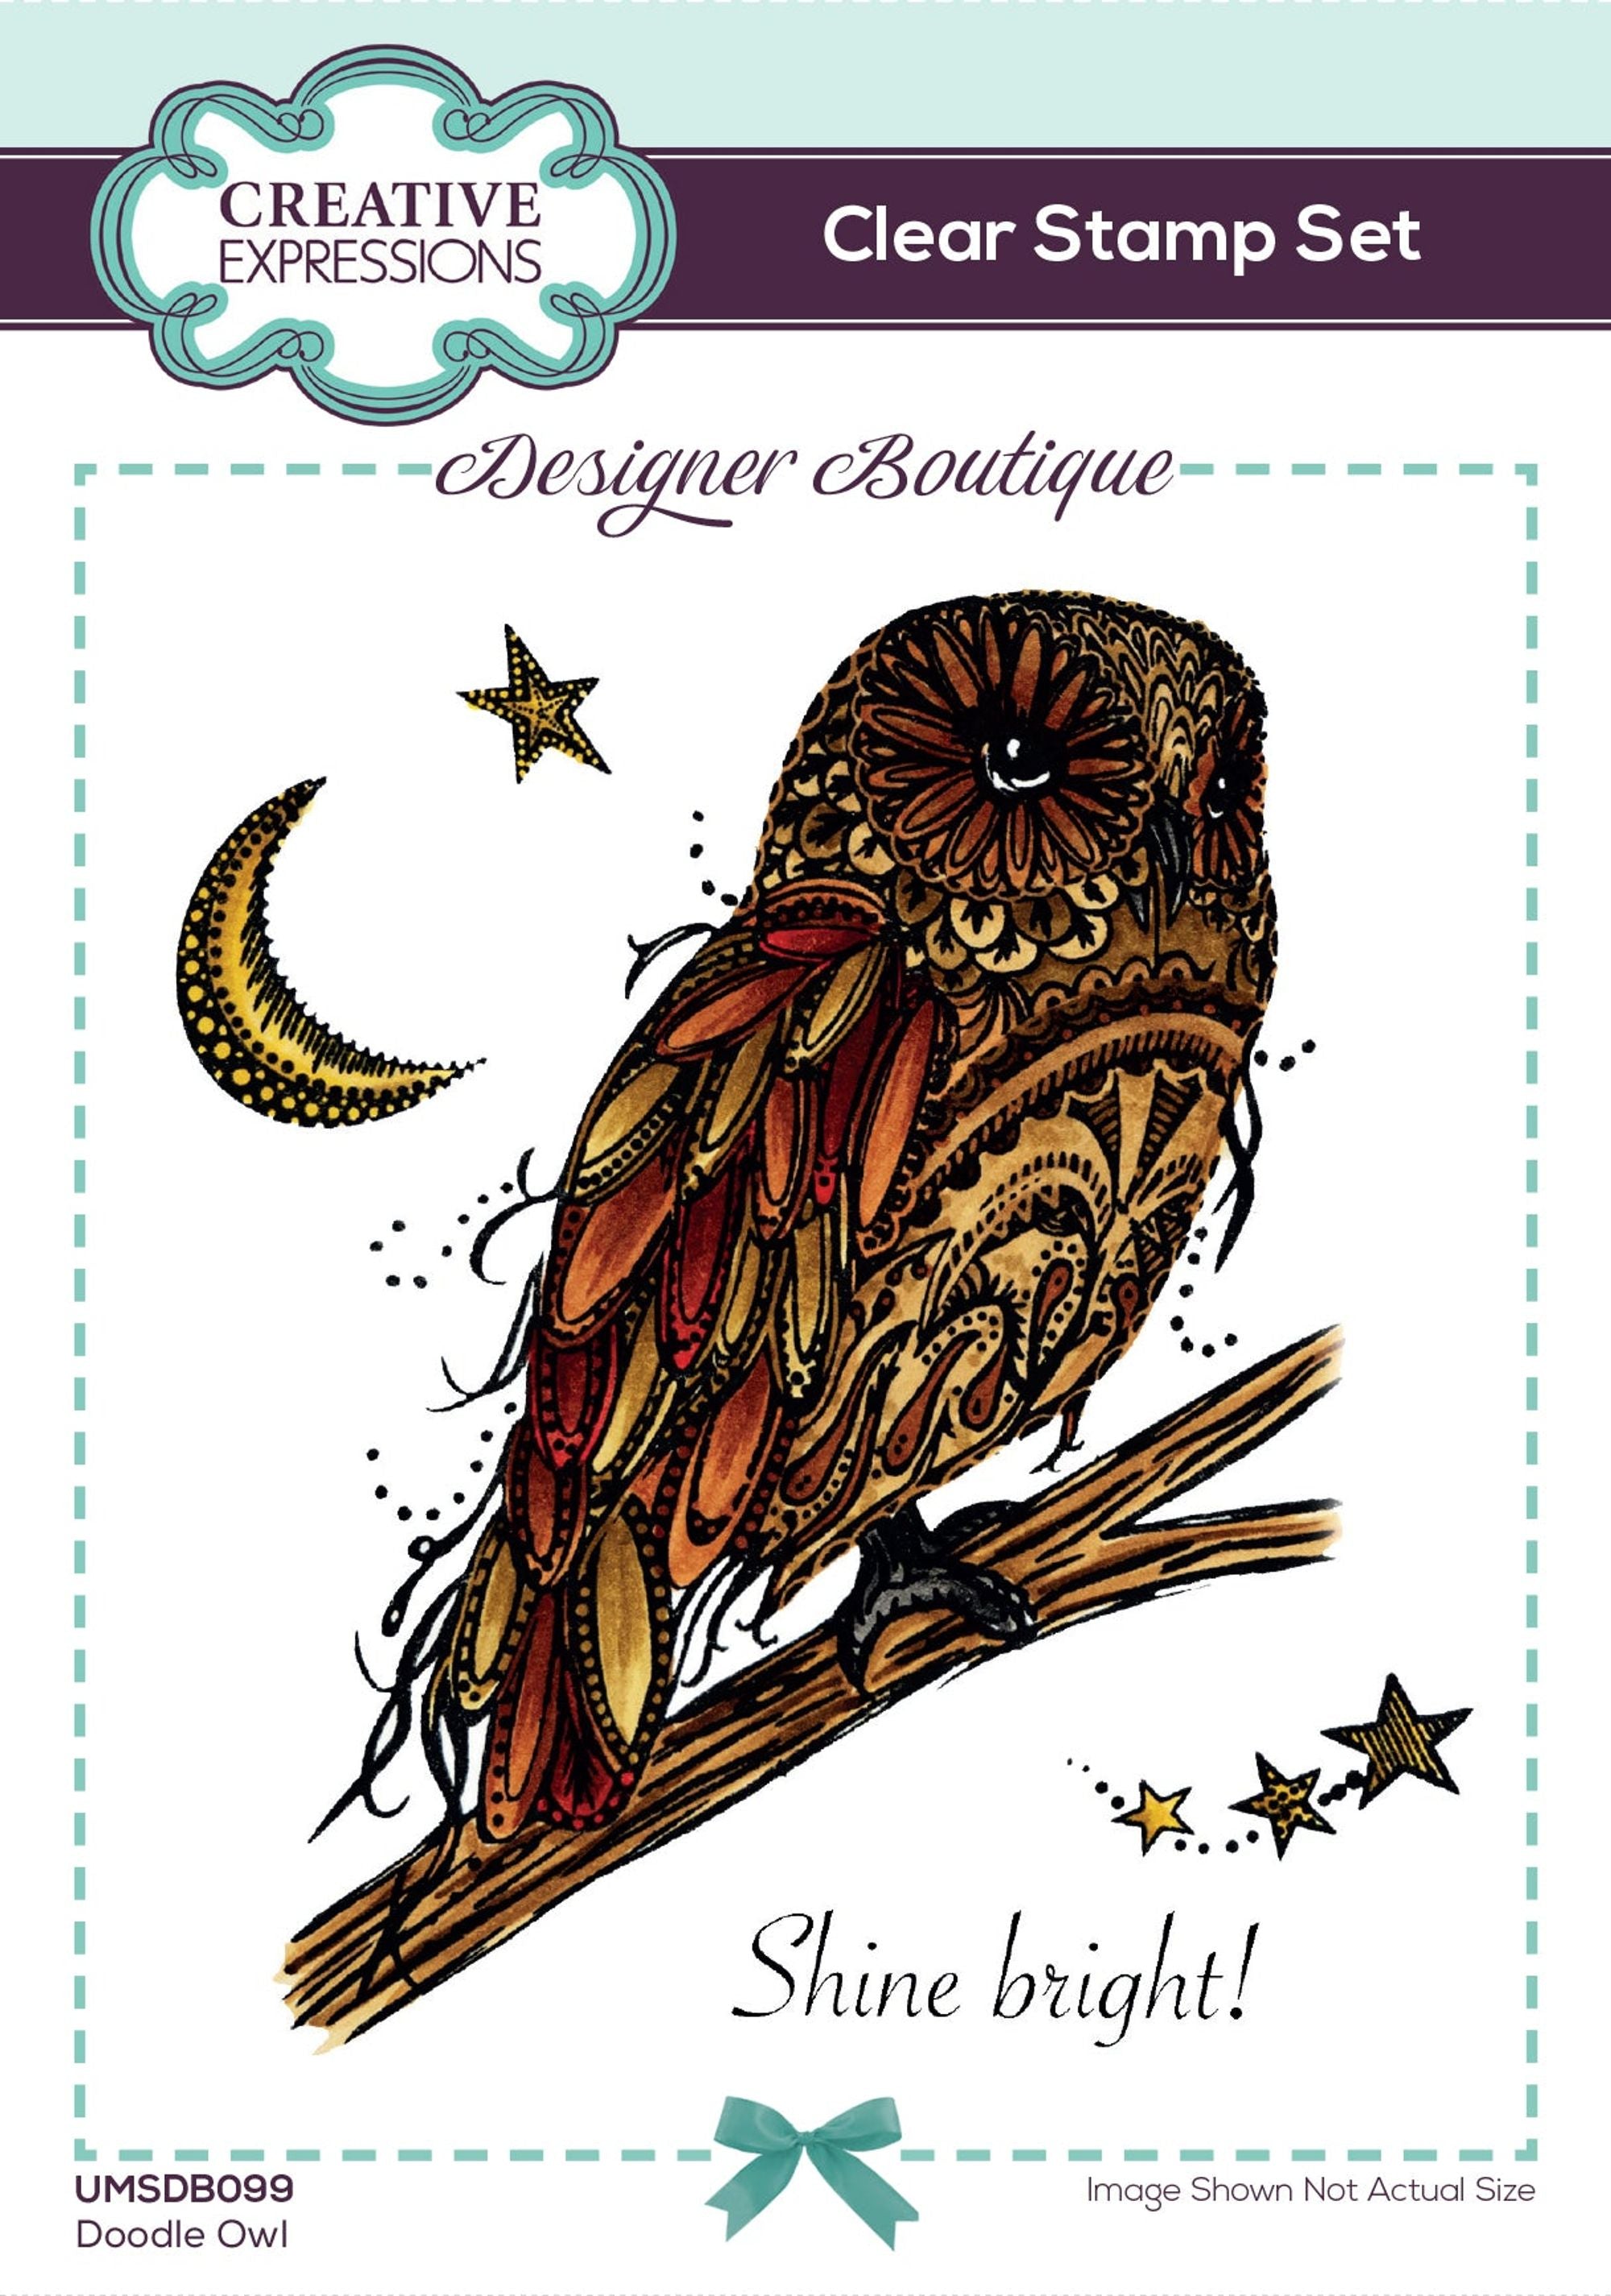 Creative Expressions Designer Boutique Doodle Owl 6 in x 4 in Clear Stamp Set